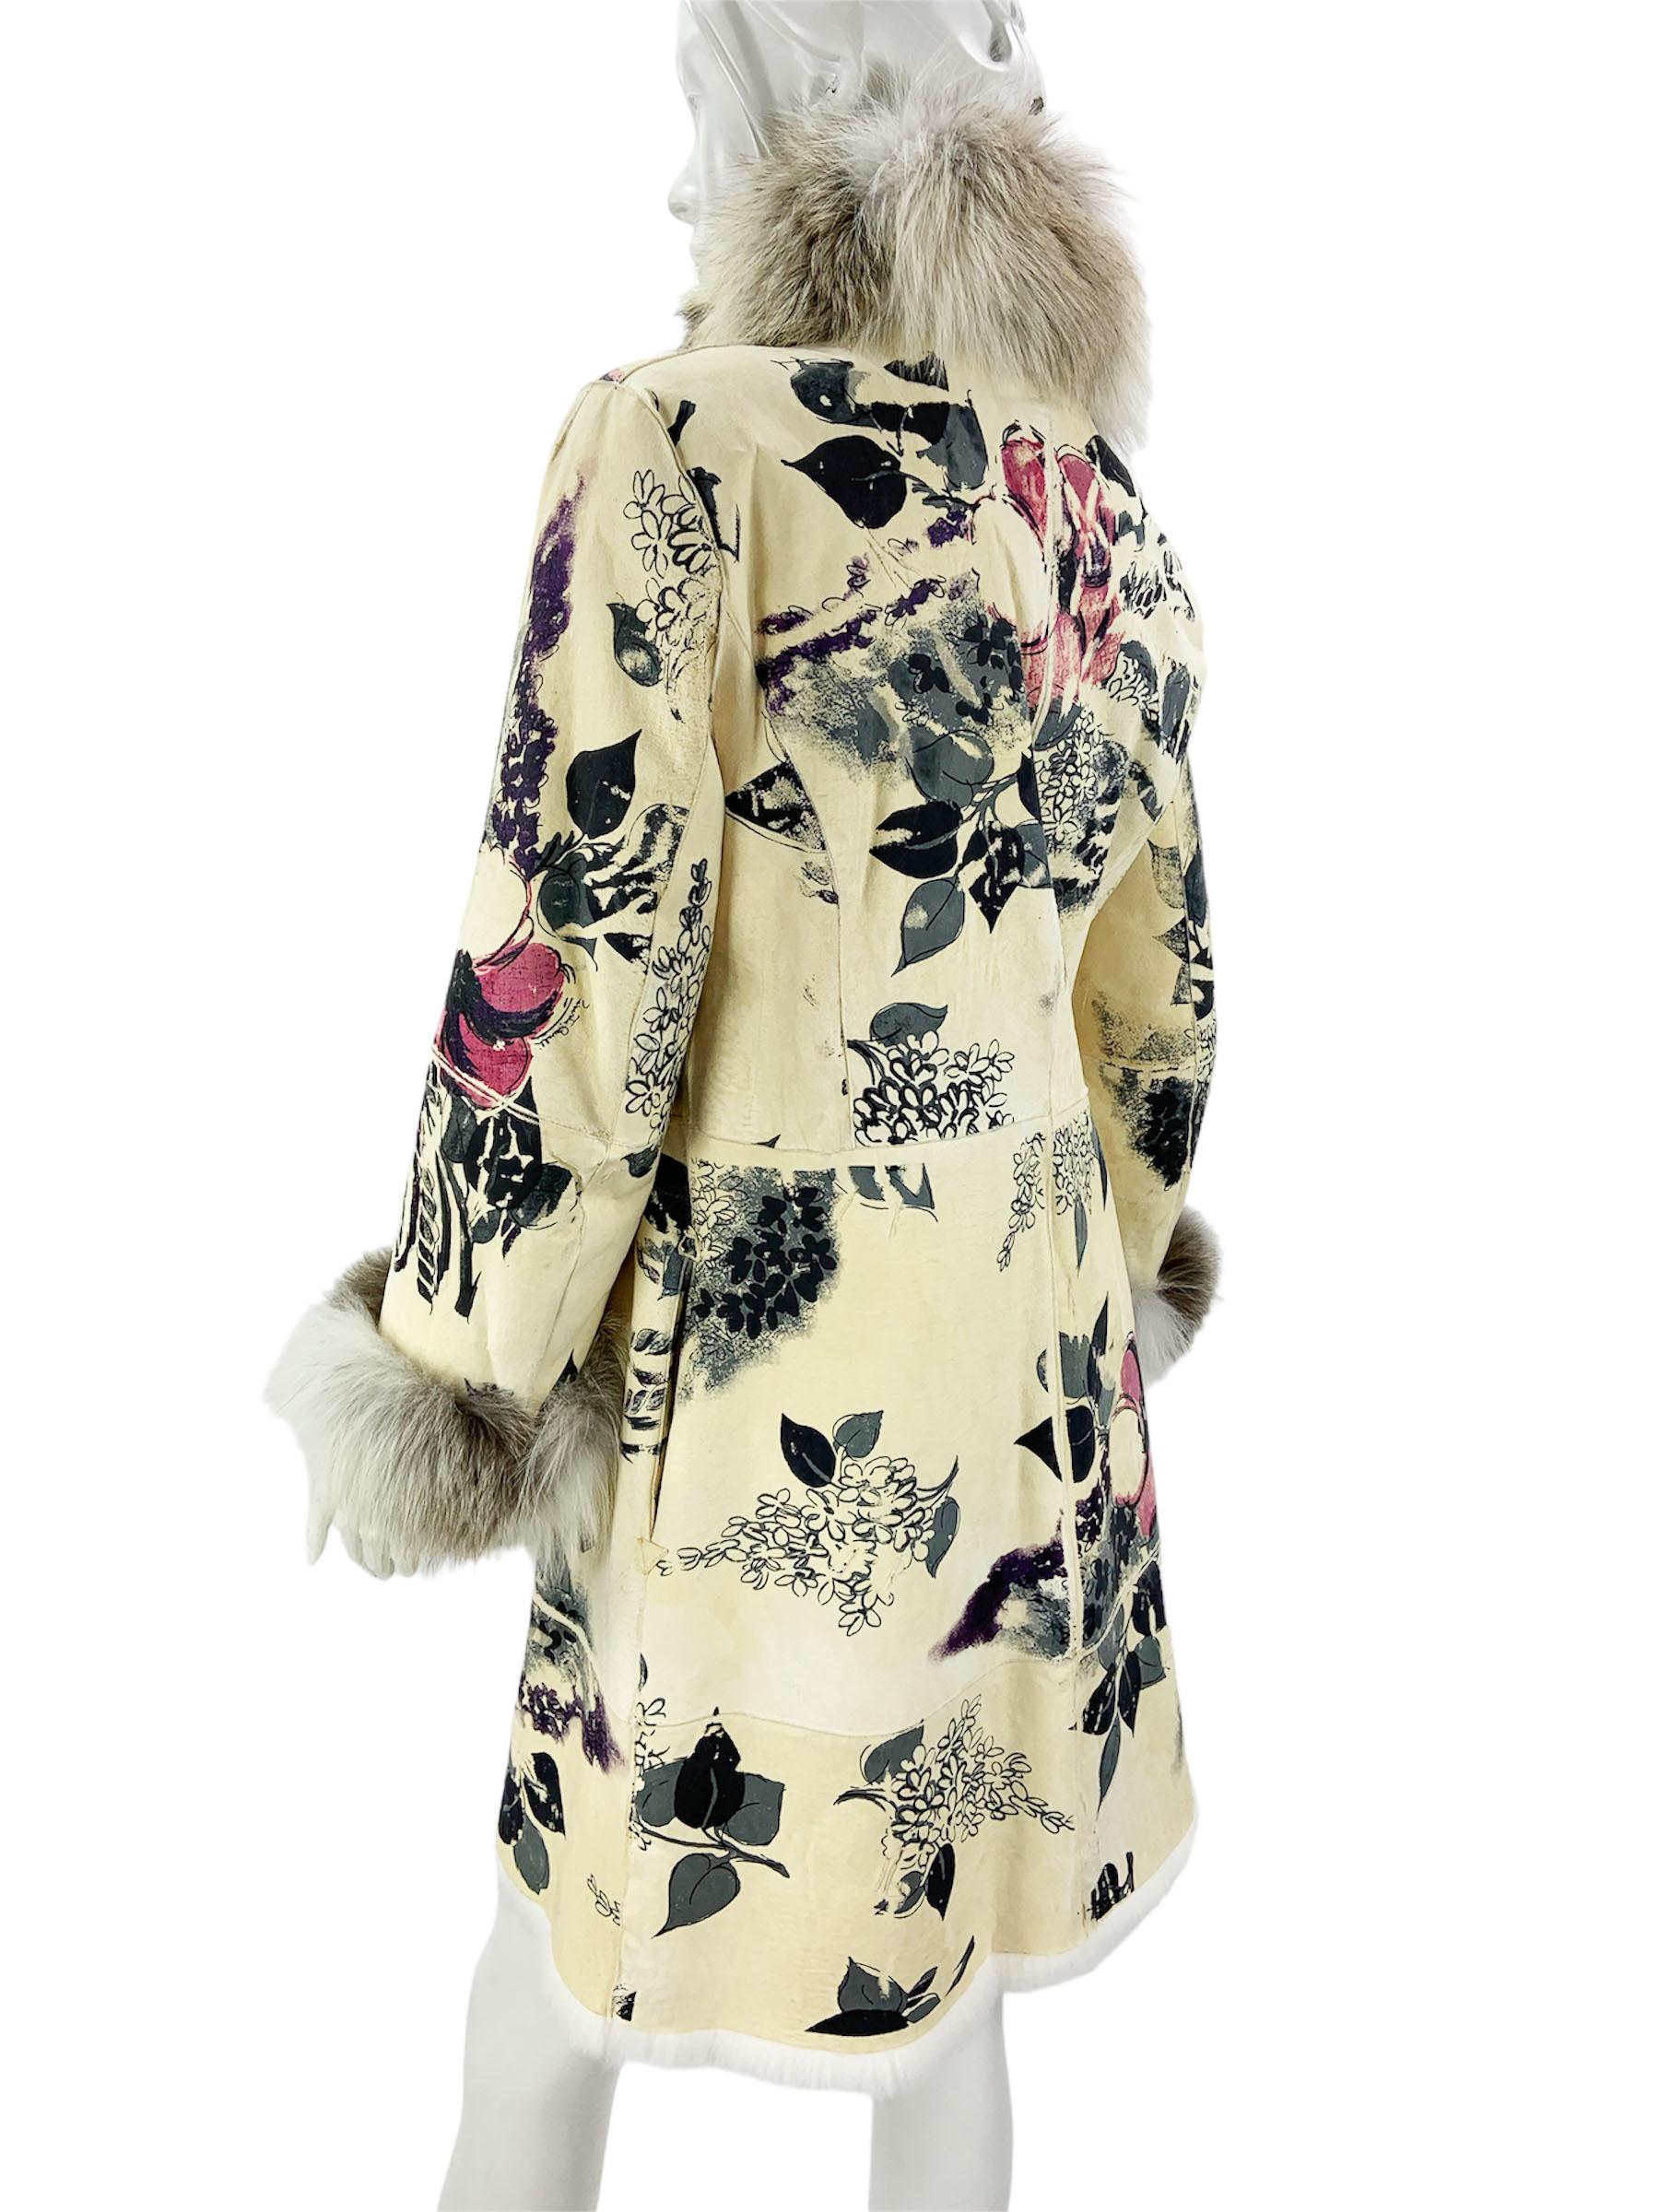 Women's Roberto Cavalli F/W 2008 Shearling Hand Painted Fur Lined Coat Italian 40 NEW For Sale